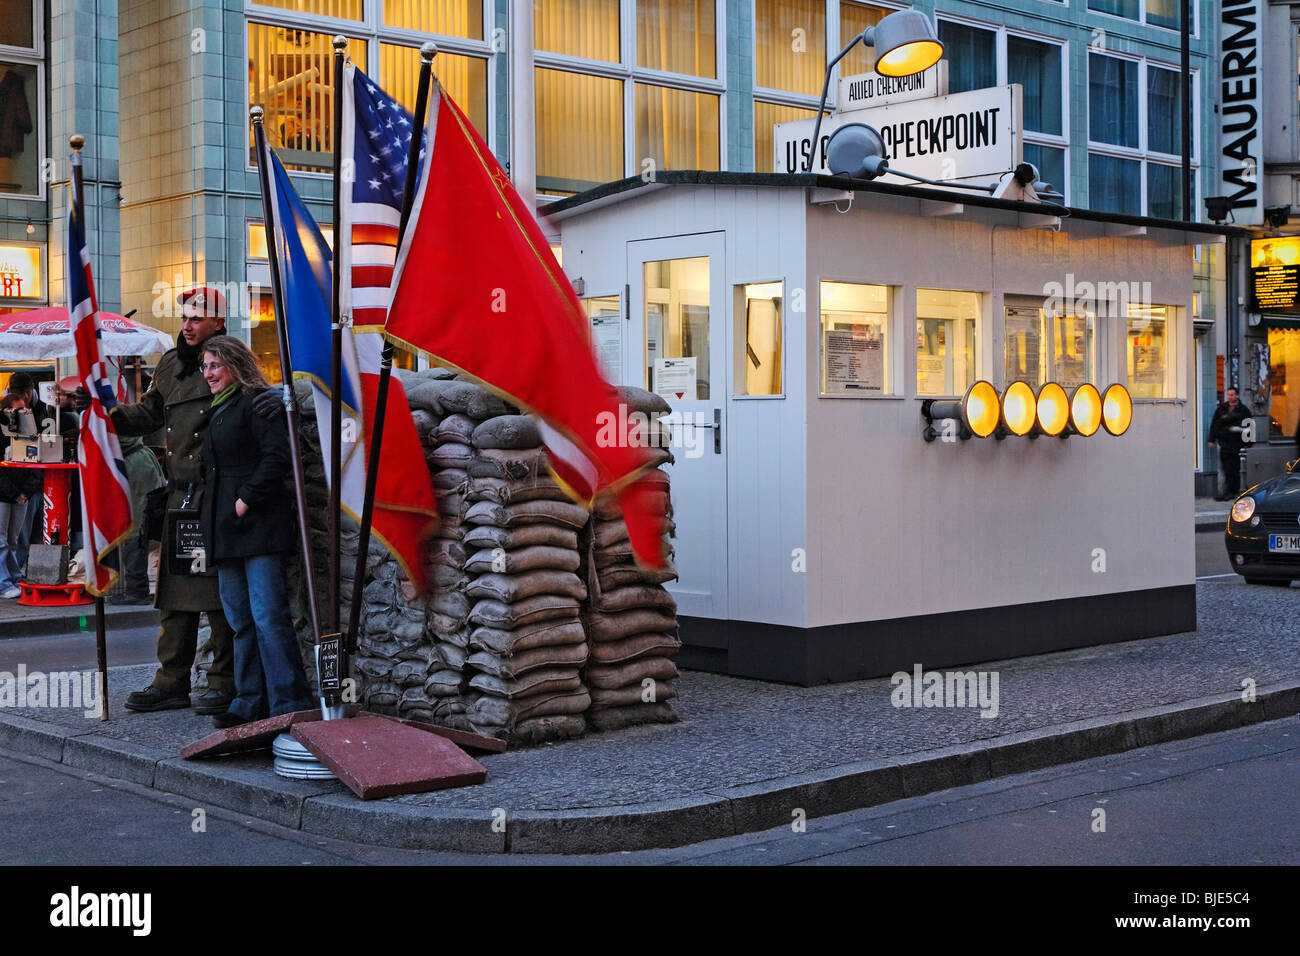 Sentry or watch cabin at Checkpoint Charlie, former border crossing in Berlin, Germany Stock Photo